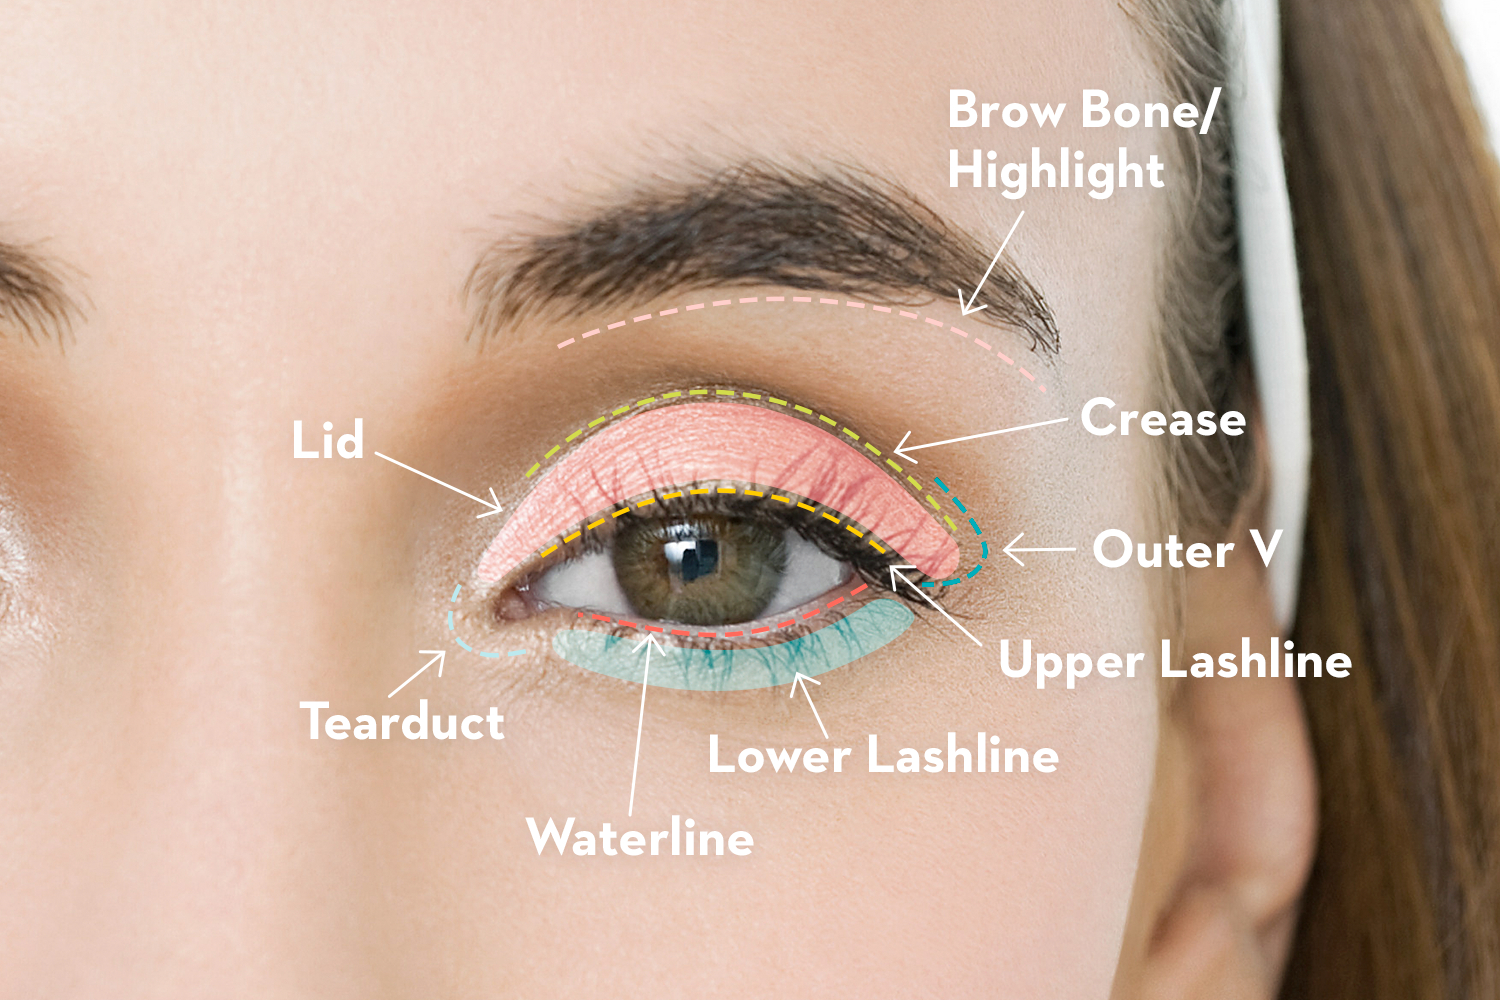 How To Apply Eye Makeup With Pictures How To Apply Eyeshadow Best Eye Makeup Tutorial